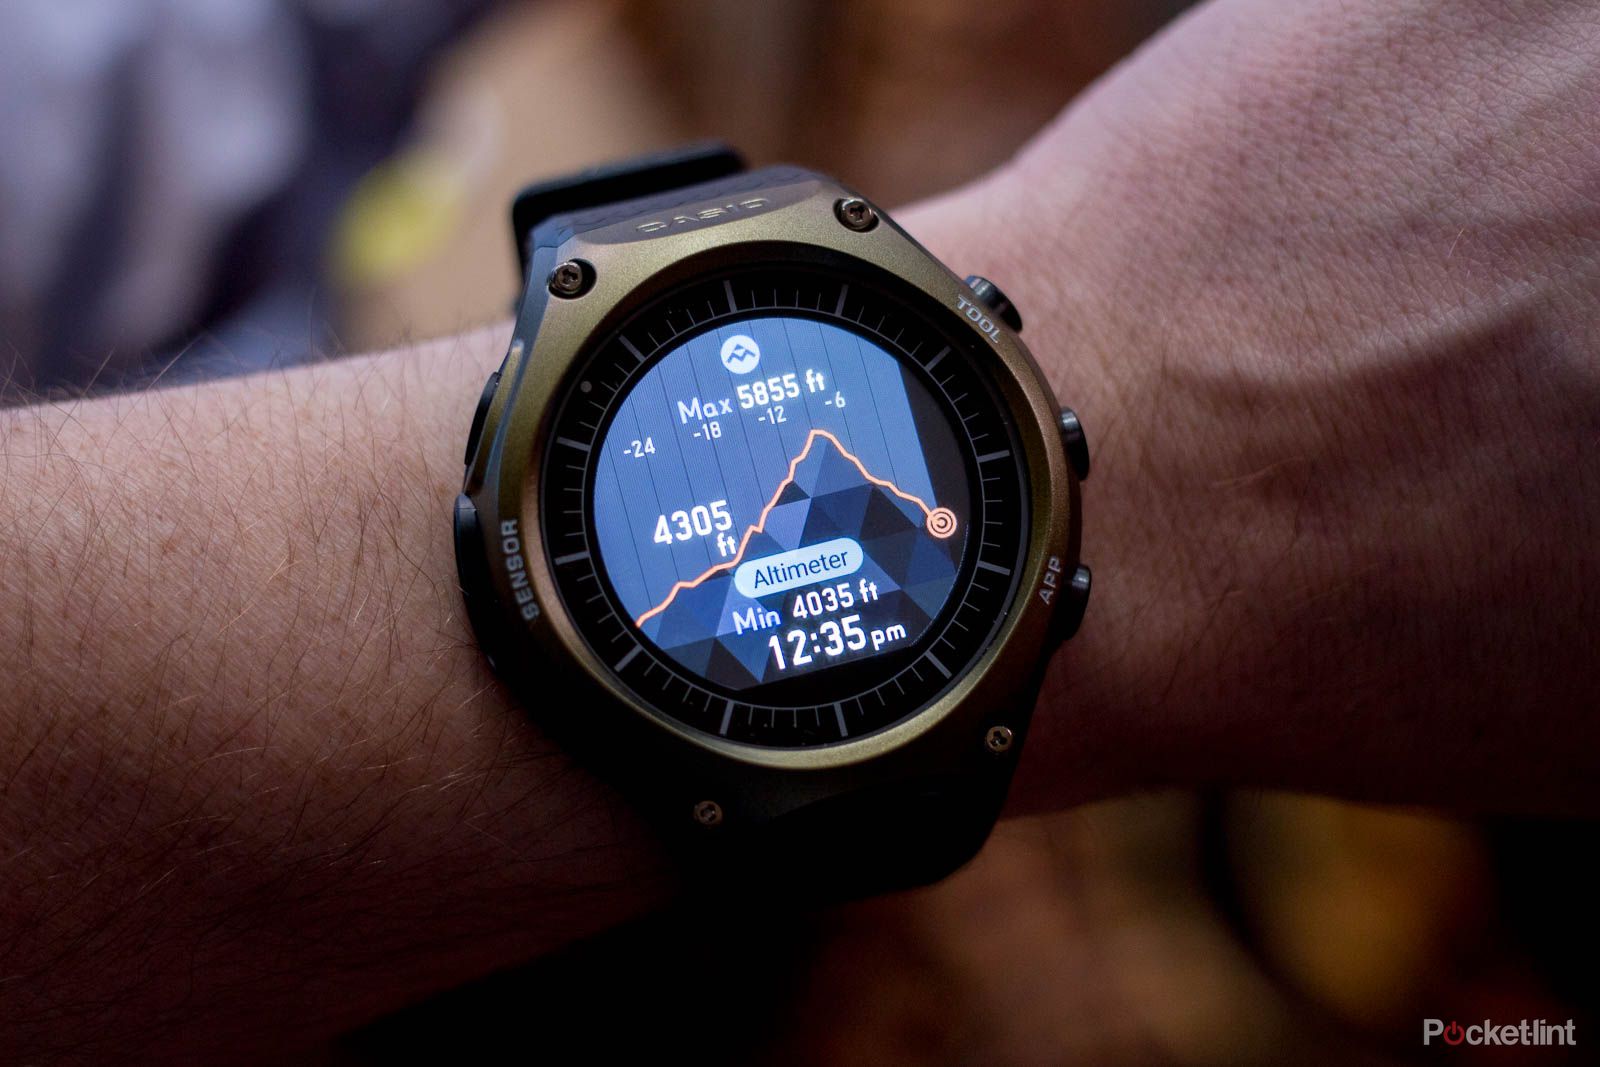 Casio WSD-F10 Android smartwatch: Google wearable rugged